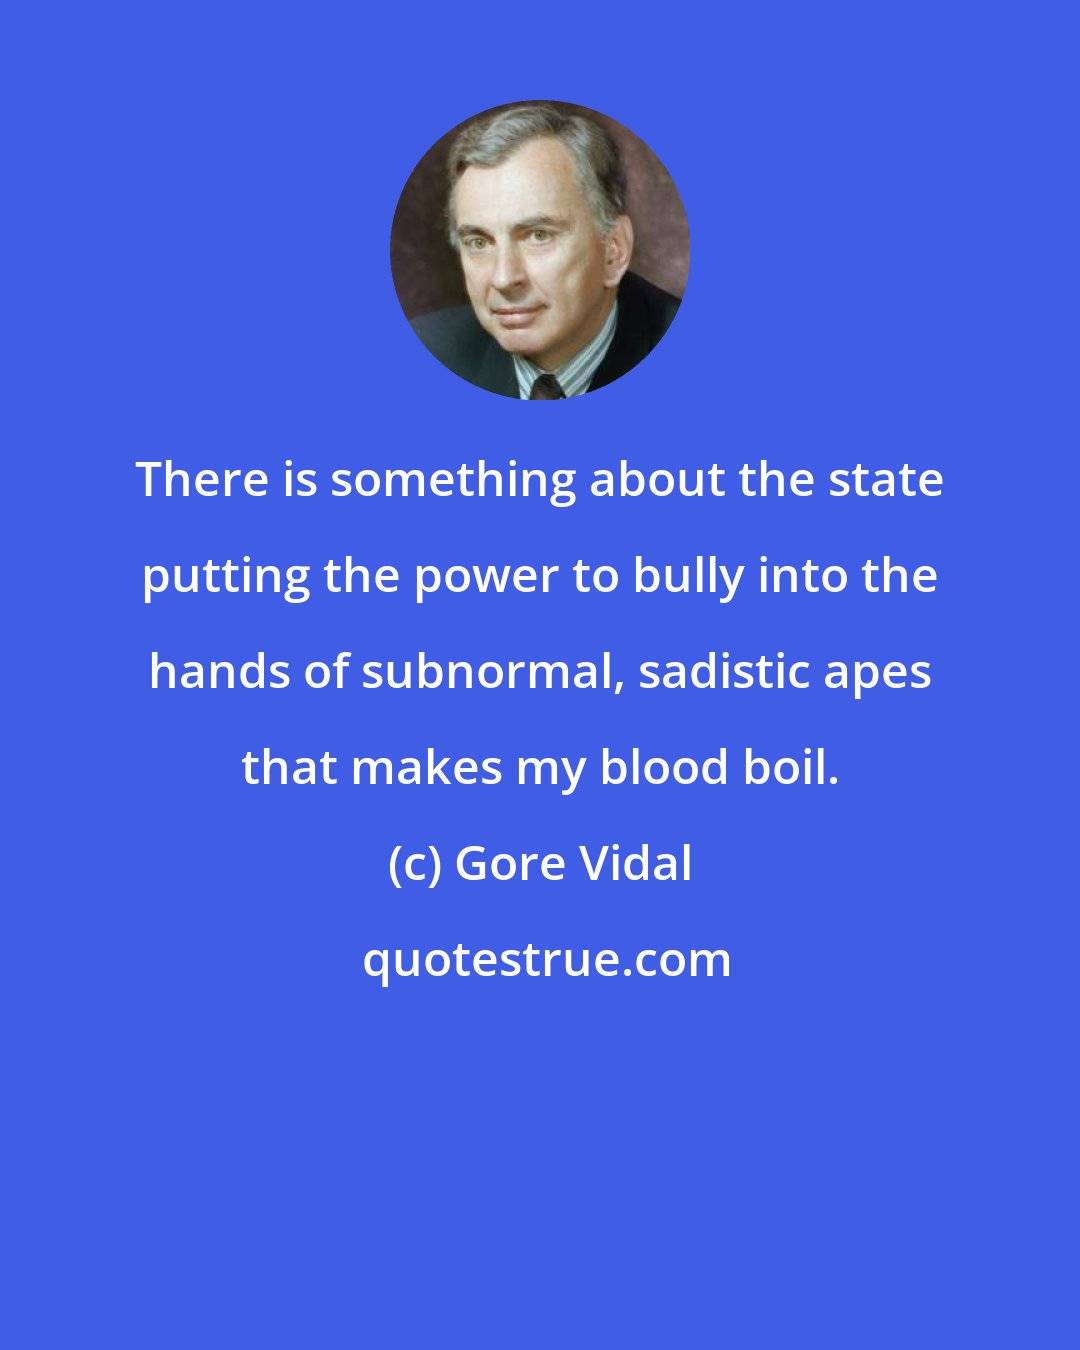 Gore Vidal: There is something about the state putting the power to bully into the hands of subnormal, sadistic apes that makes my blood boil.